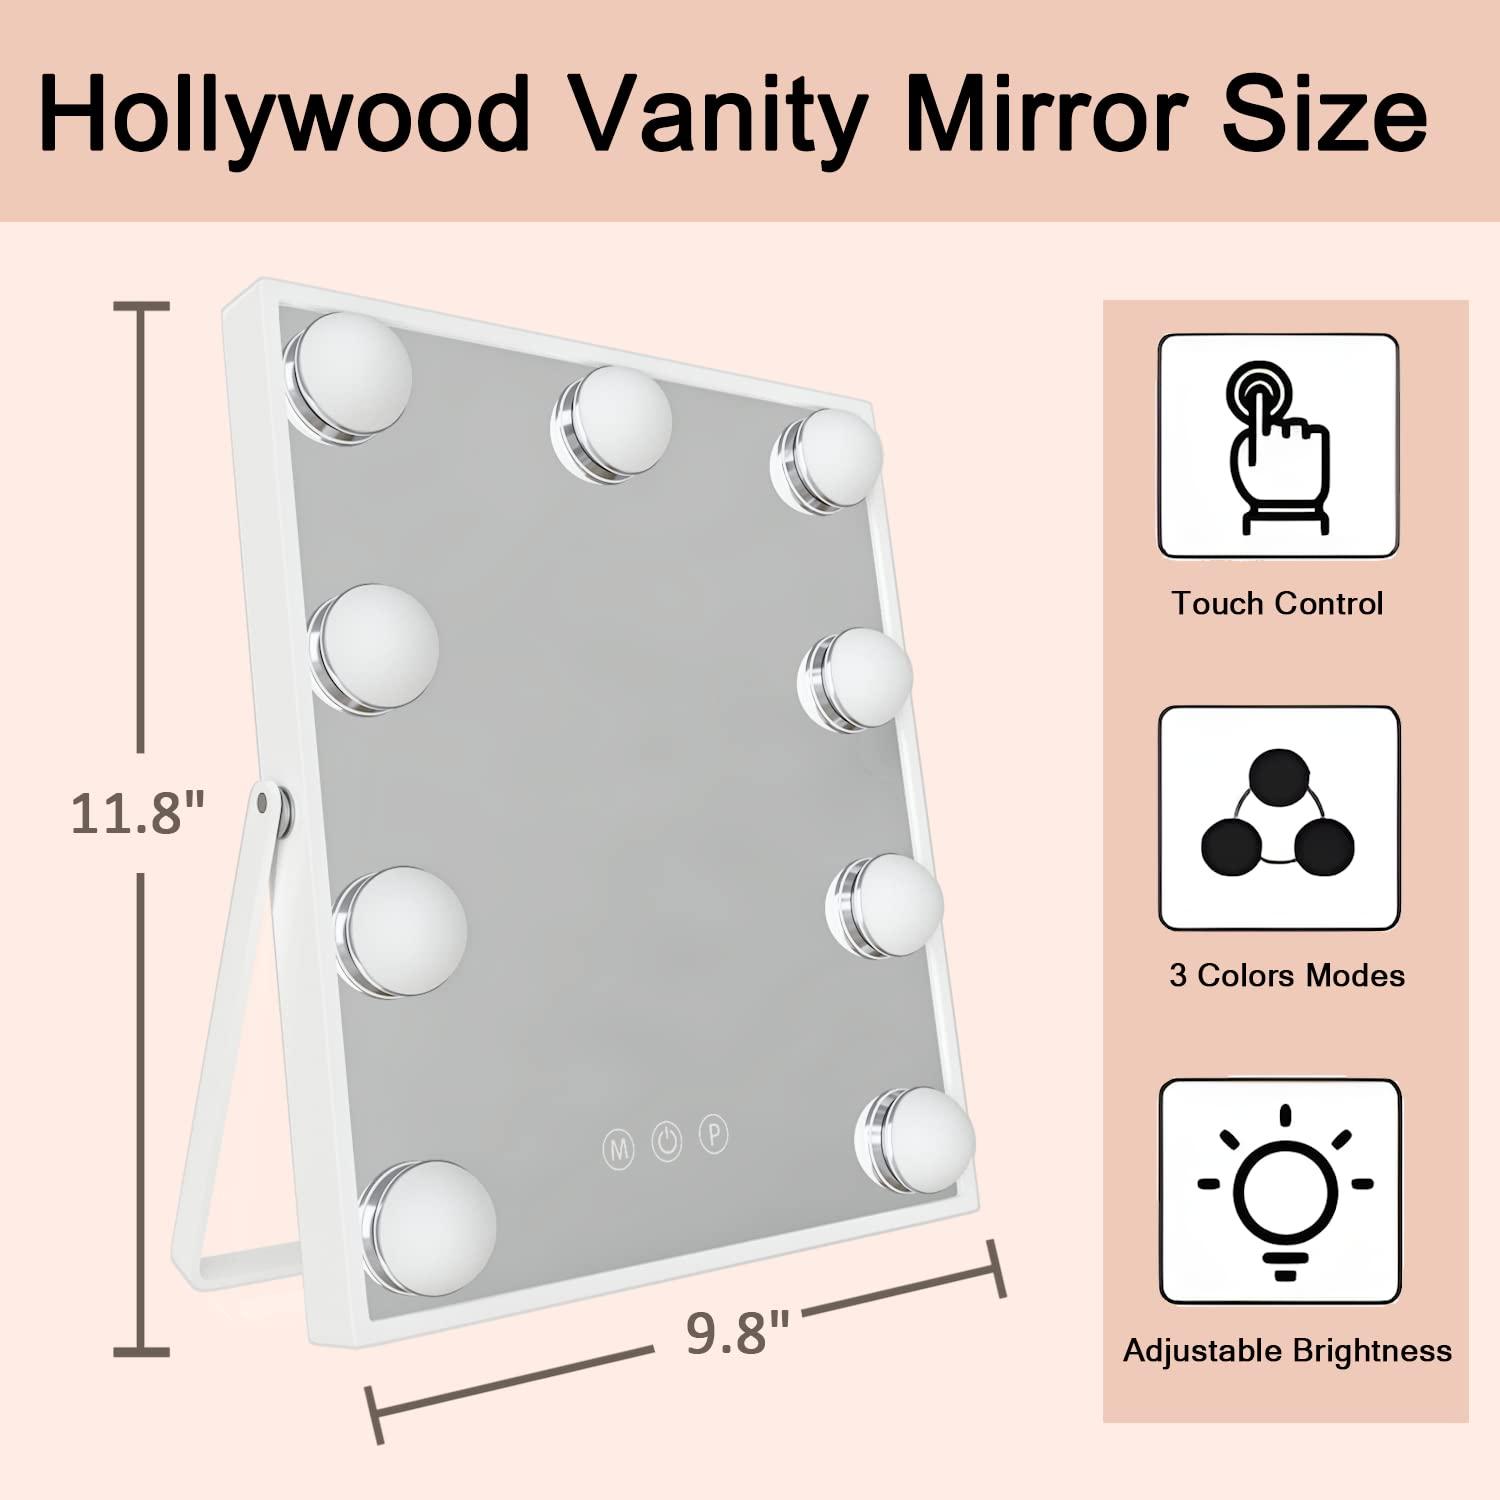 Manocorro 9 LED Bulbs Hollywood Vanity Mirror with Lights Hollywood Makeup Mirror  Small Vanity Lighted Mirror with 3 Color Lighting Modes Smart Touch Control  Plug in Light Up White